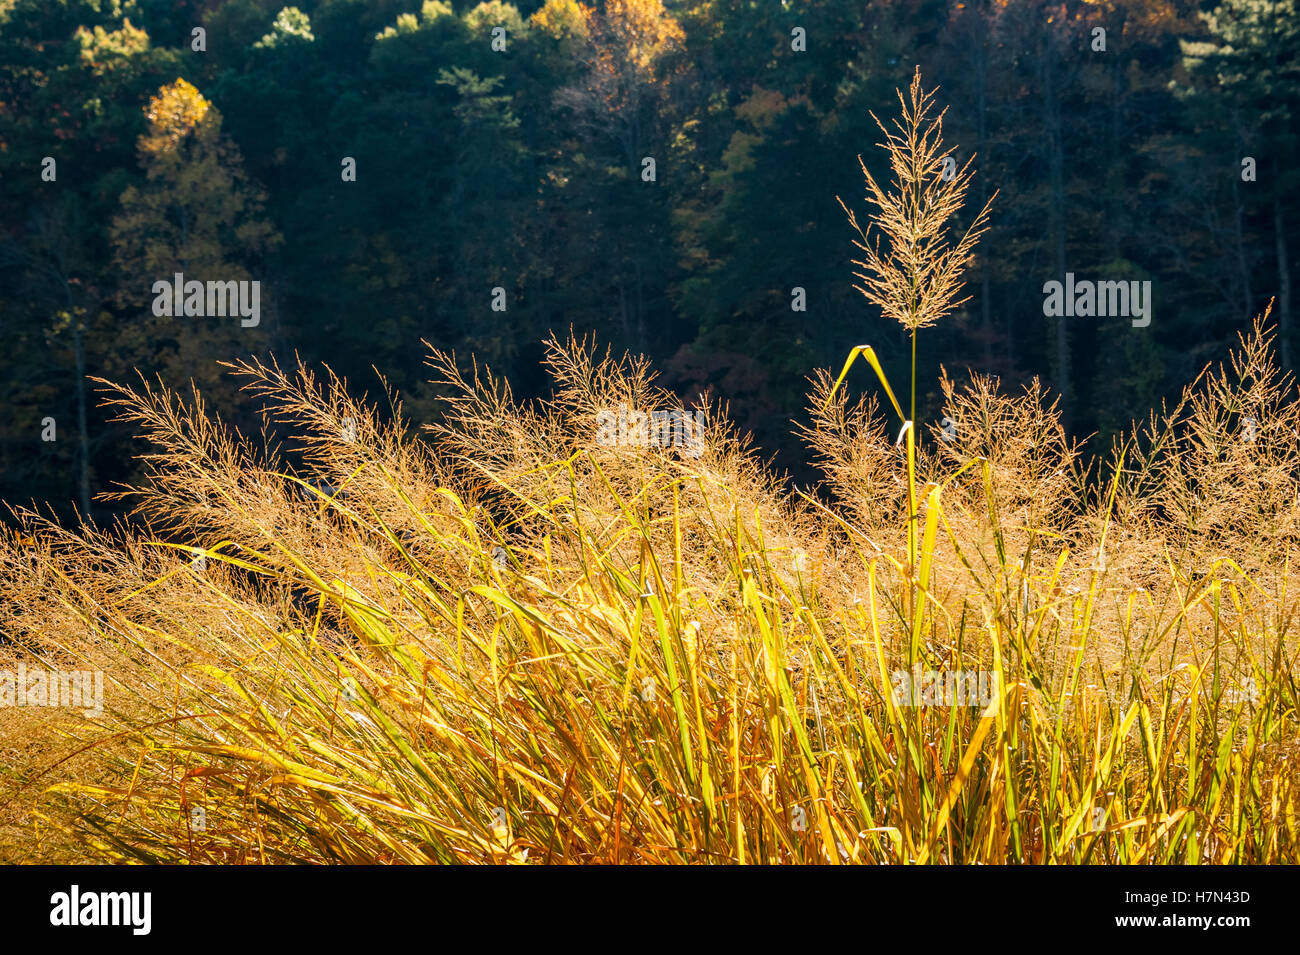 Tall grass backlit by the sun in North Georgia's Blue Ridge Mountains at Vogel State Park in the Chattahoochee National Forest. Stock Photo